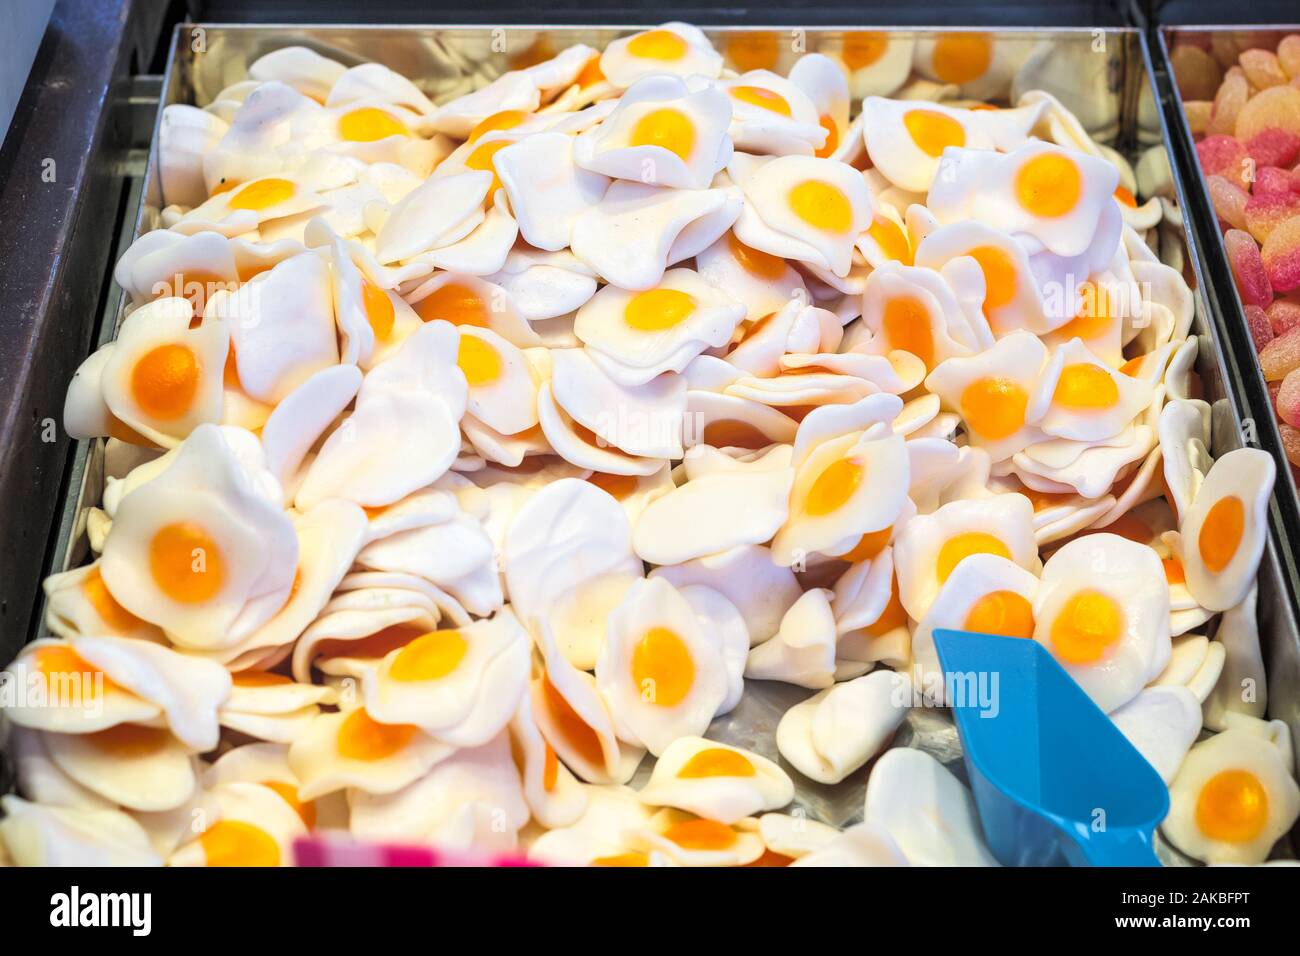 Selective focus, fried eggs soft jelly sweet on display at Christmas market in winter wonderland of London Stock Photo